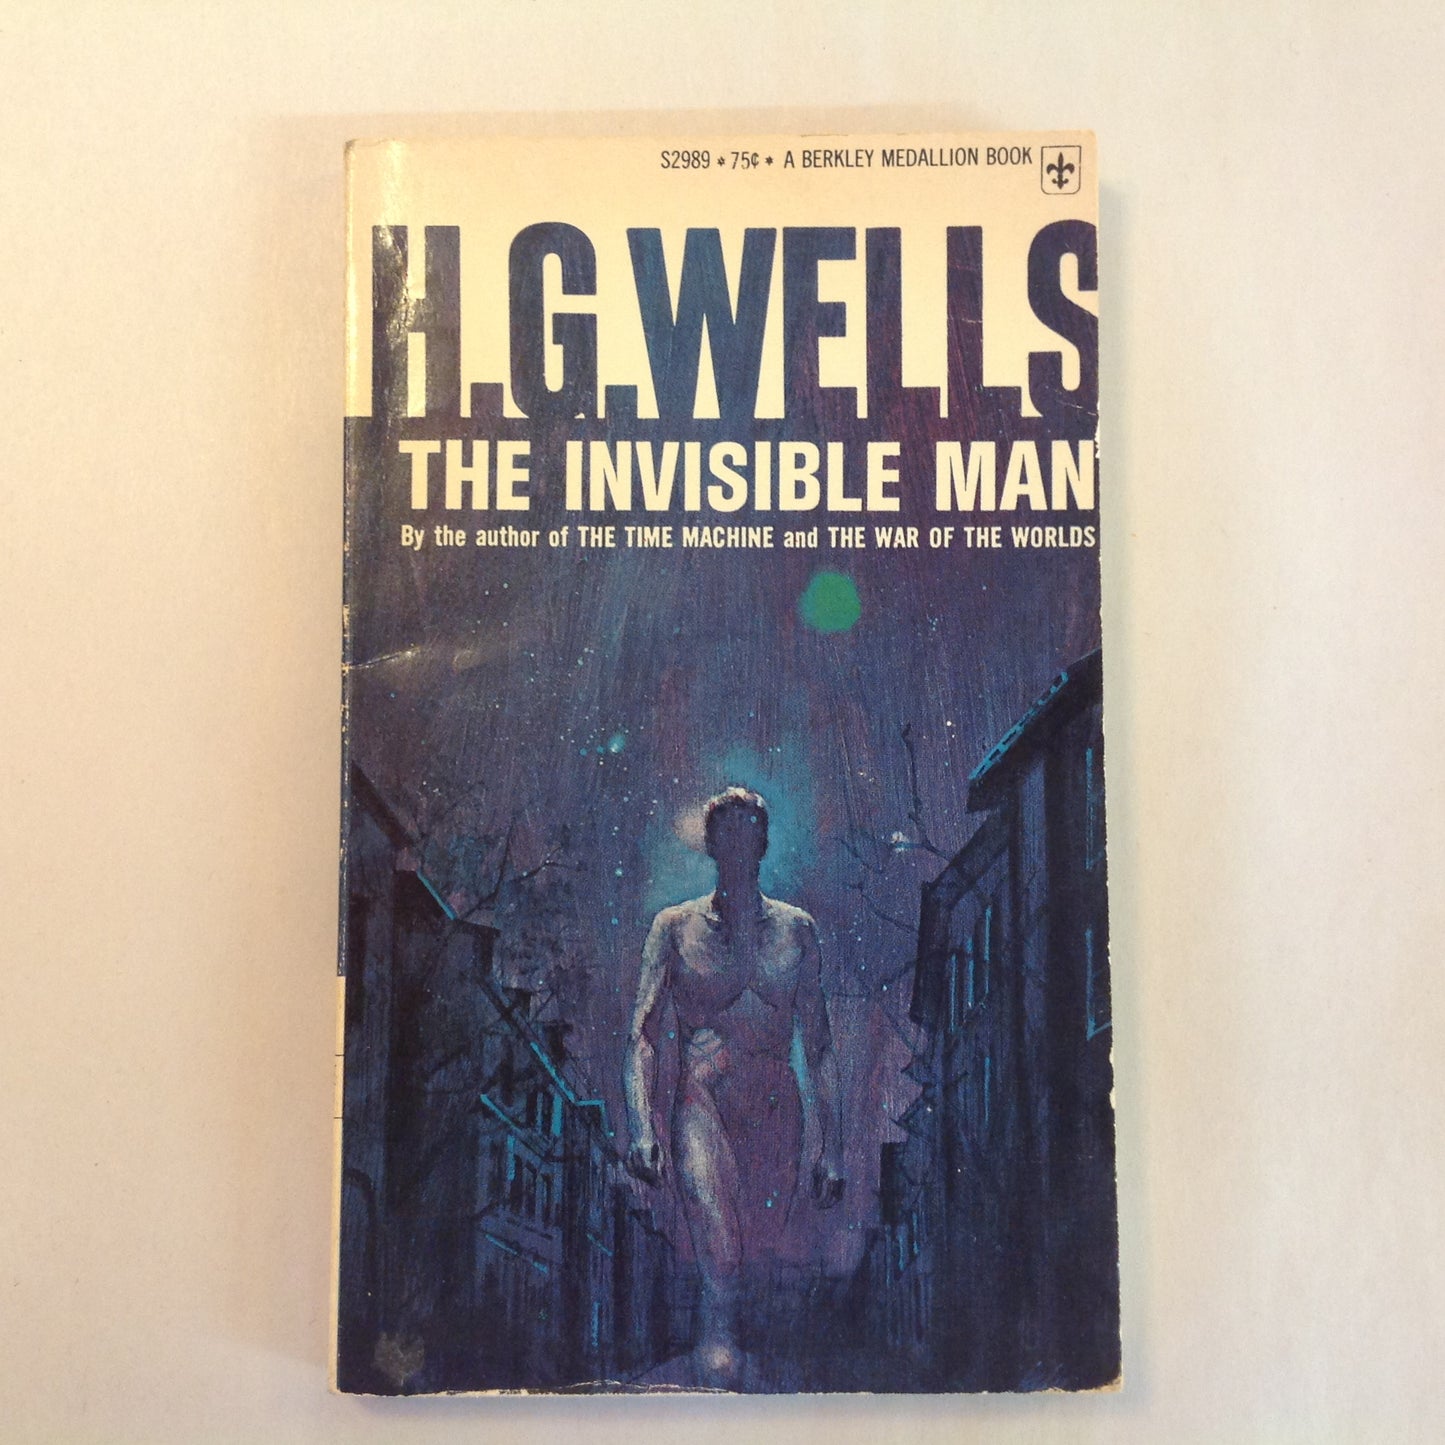 Vintage 1964 Mass Market Paperback The Invisible Man H. G. Wells